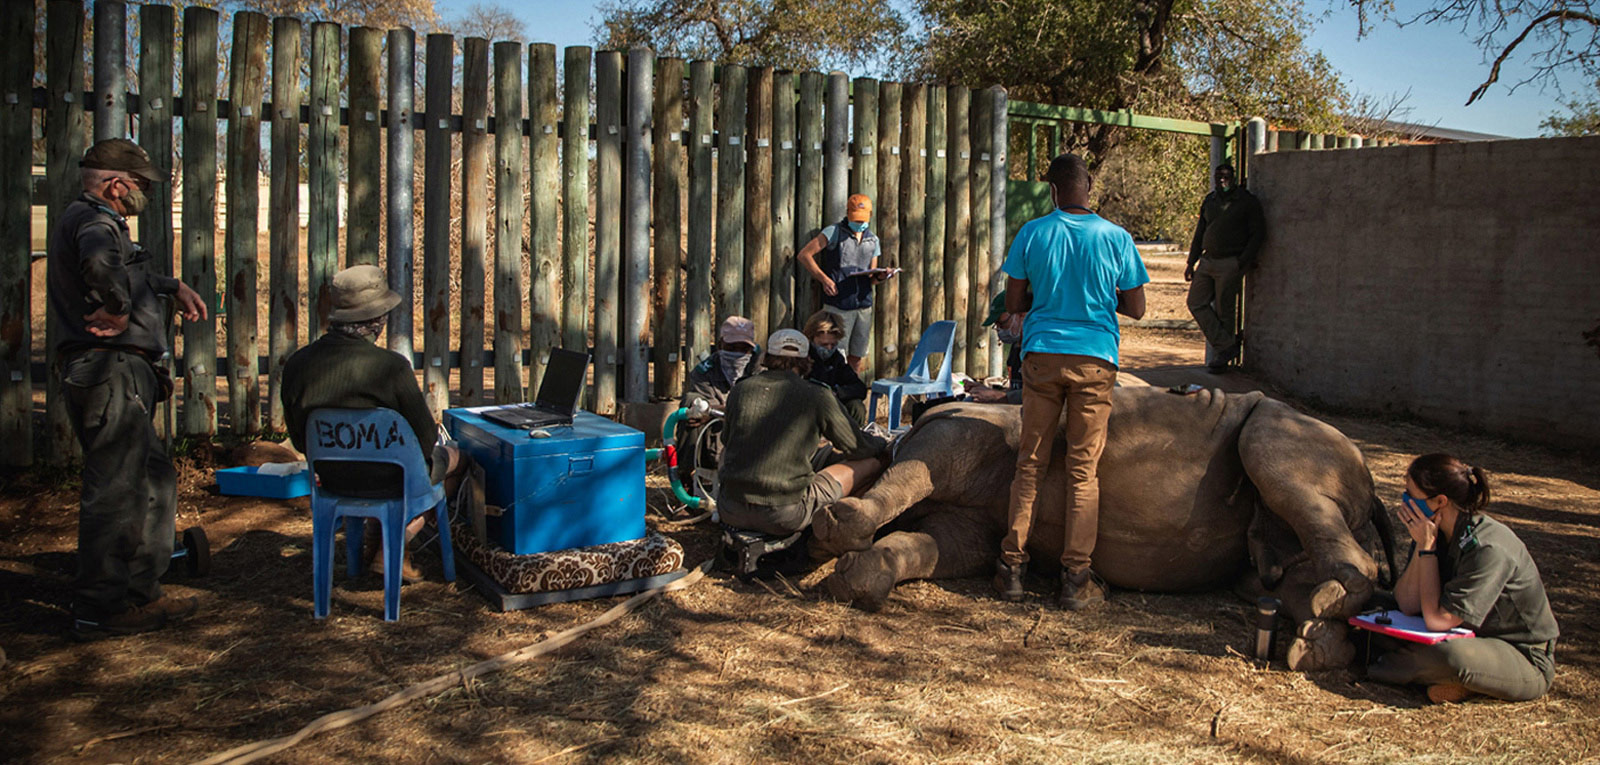 A rhino being immobilized